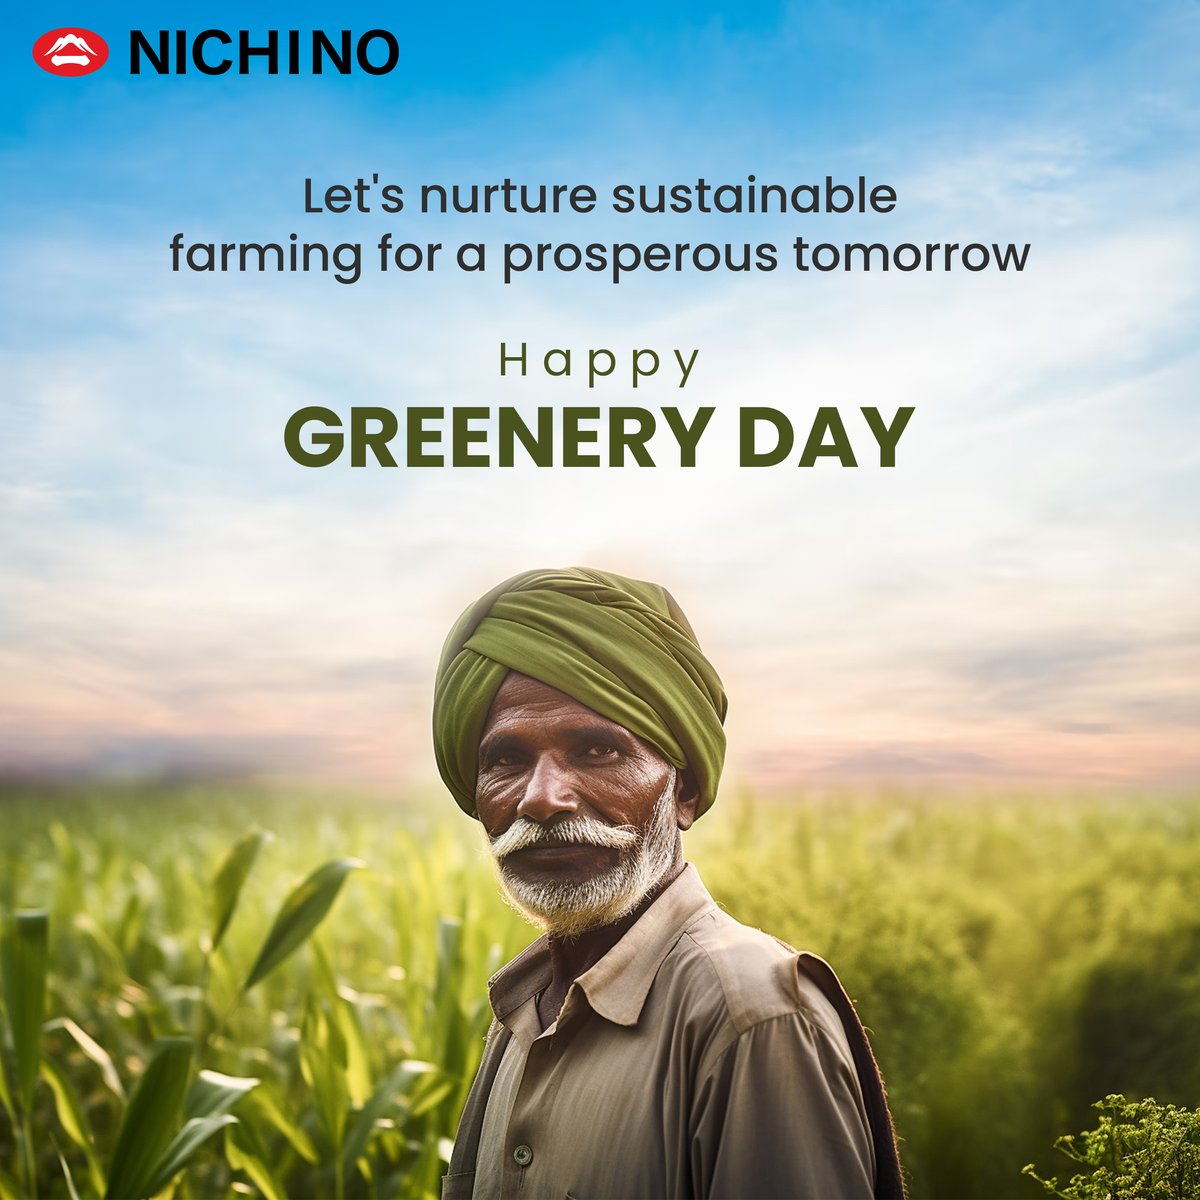 On this Greenery Day, we recommit to eco-friendly farming practices that respect nature and ensure bountiful harvests for a prosperous future. Nurturing the land sustainably paves the way for abundance. Happy Greenery Day!

#Greeneryday #harvest #sustainability #Nichinoindia